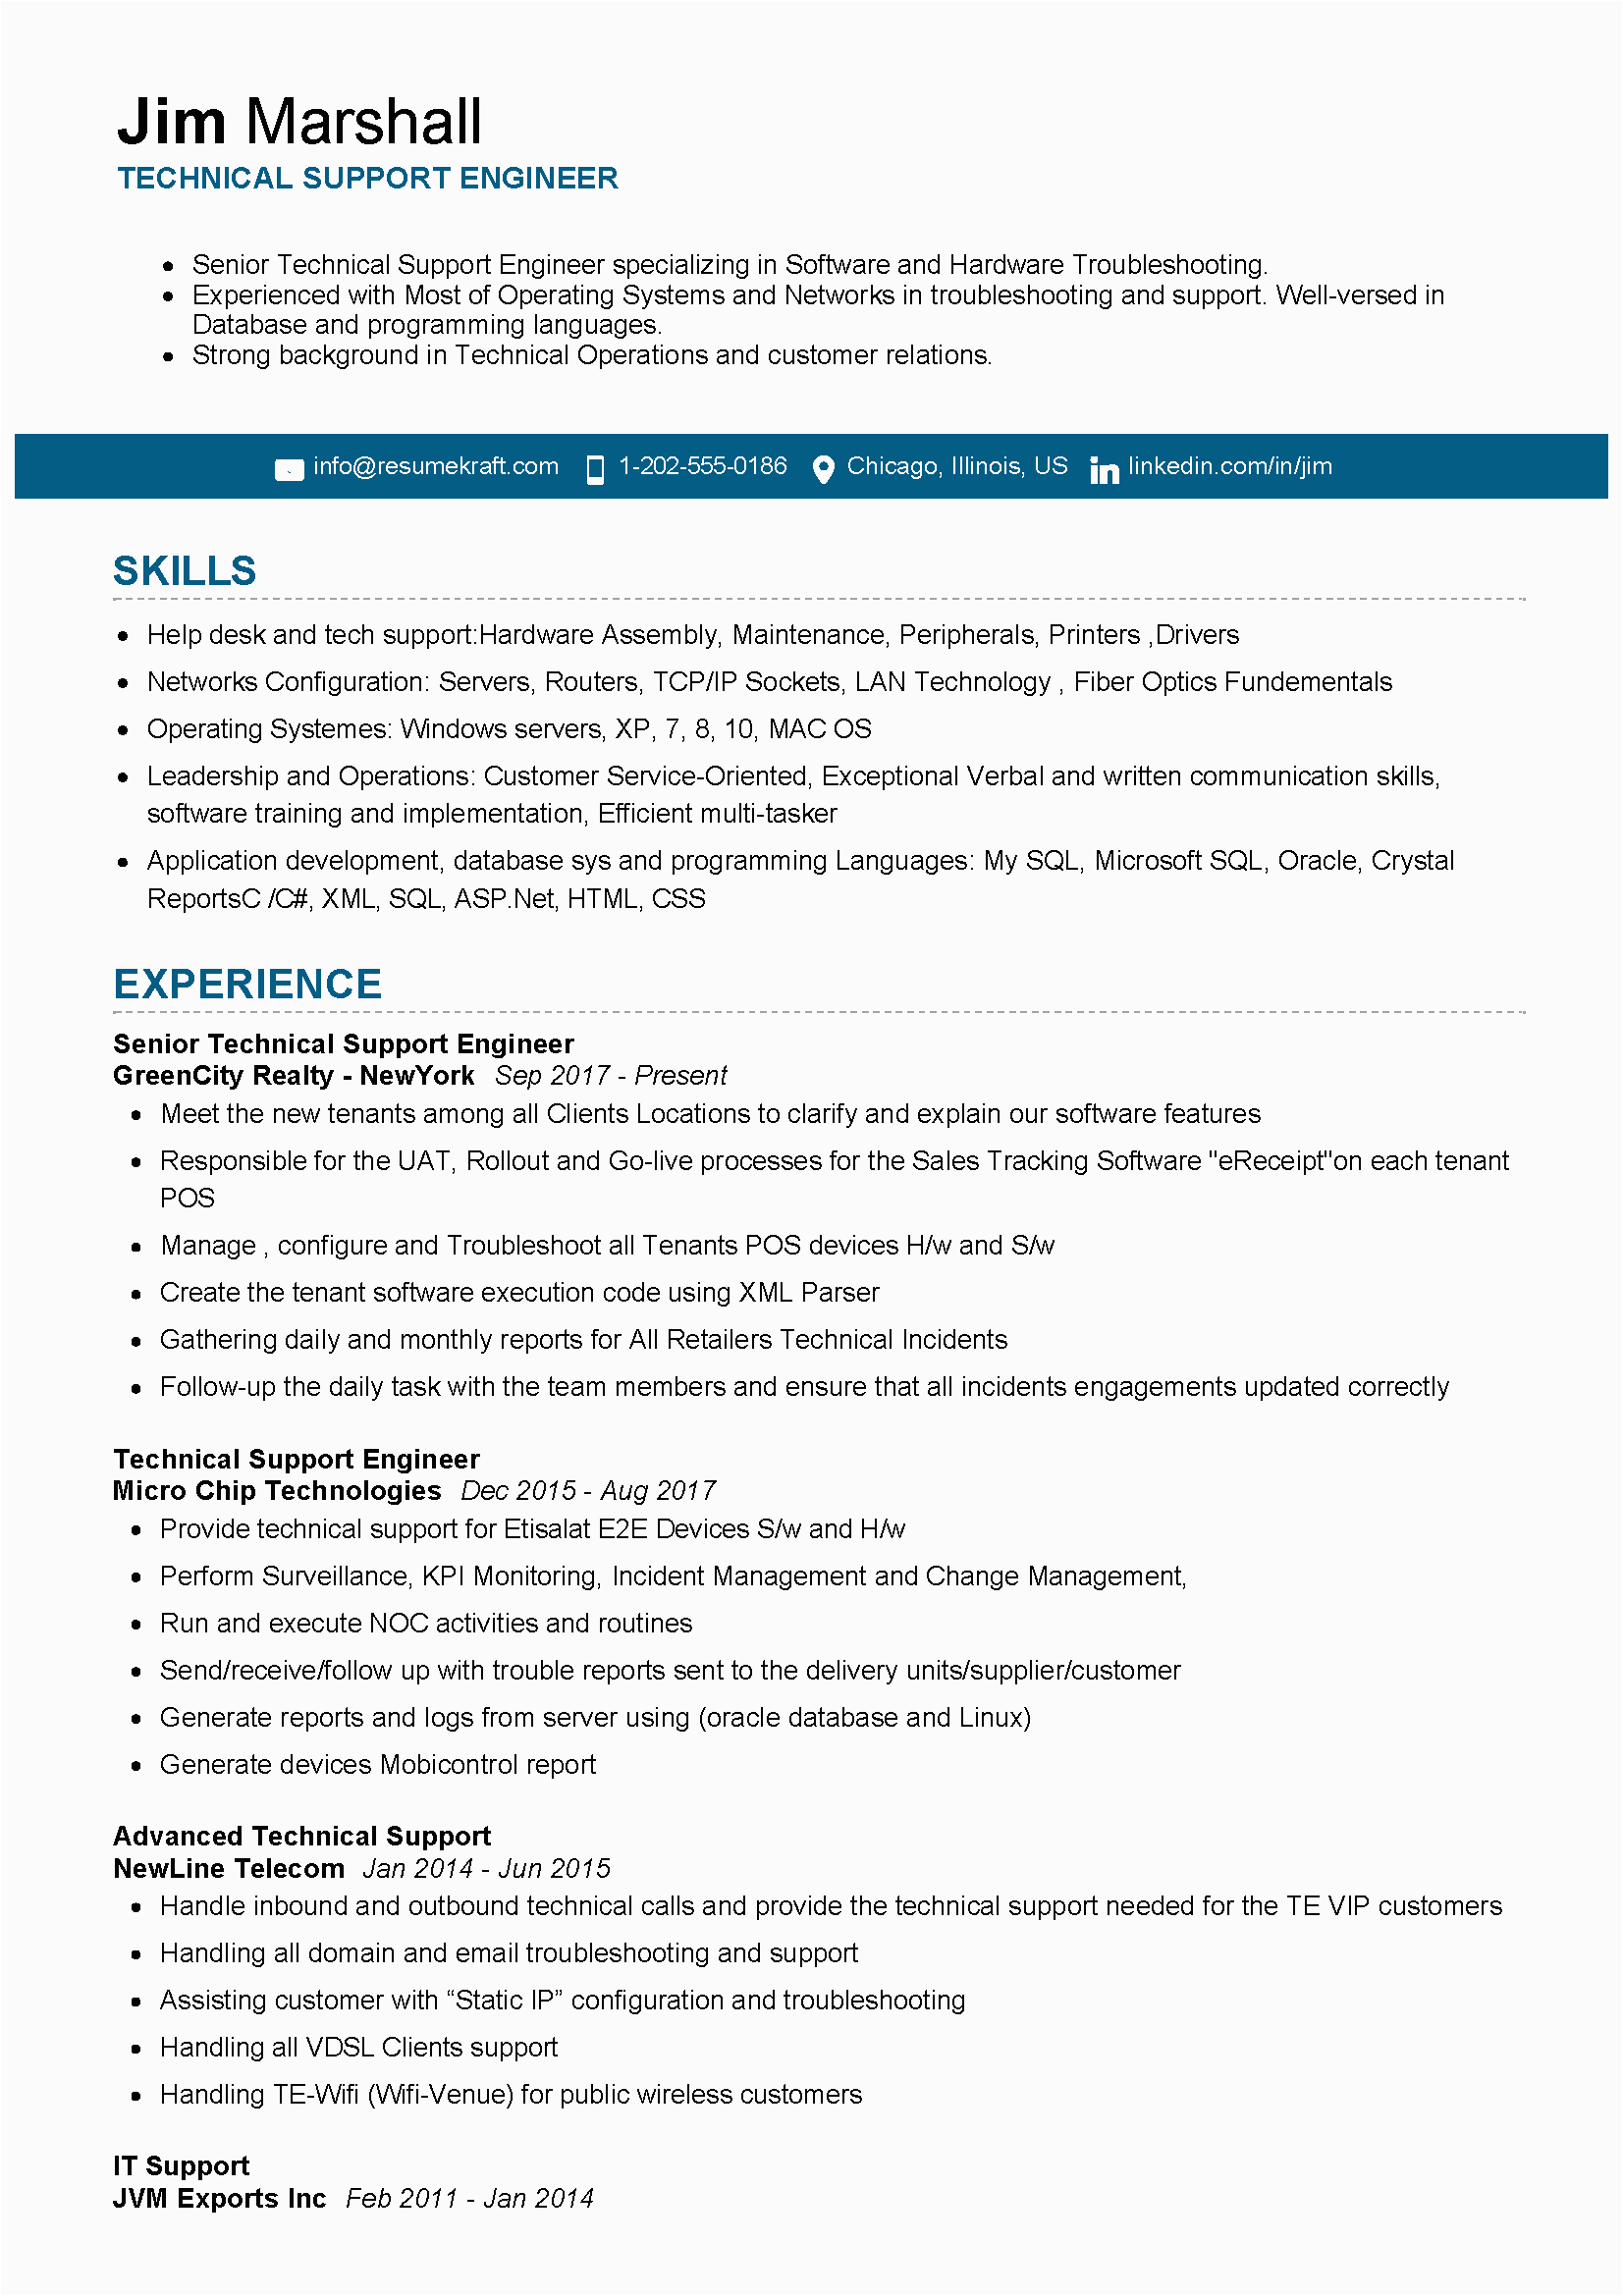 Sample Resume for Experienced Technical Support Engineer Technical Support Engineer Resume Sample